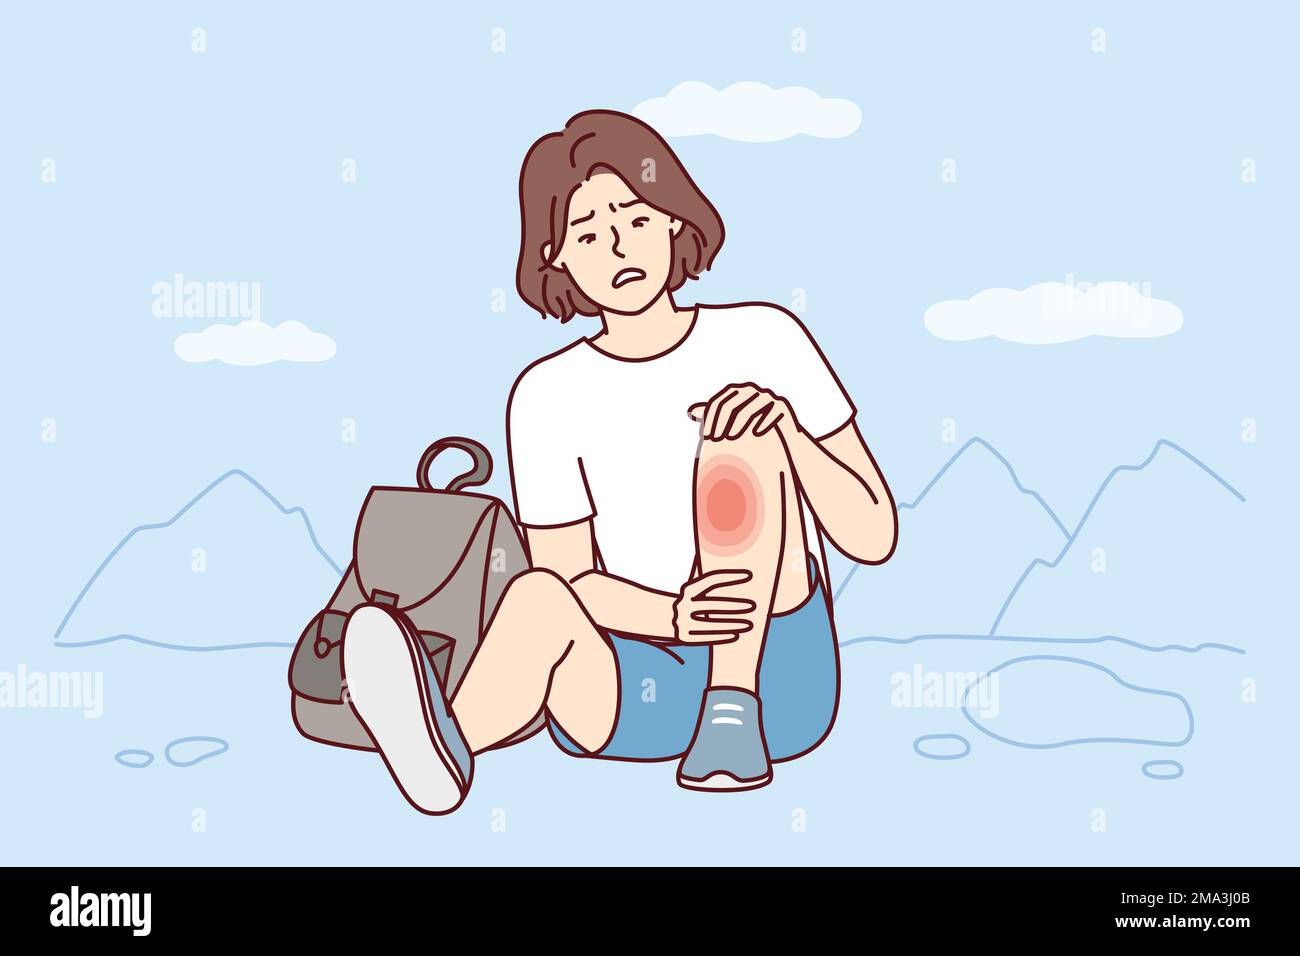 Weakened woman sits on ground with fear looks at wound on leg after fall during walk. Traveler girl was injured during hike and needs healing ointment or dressing of fracture site. Flat vector image Stock Vector